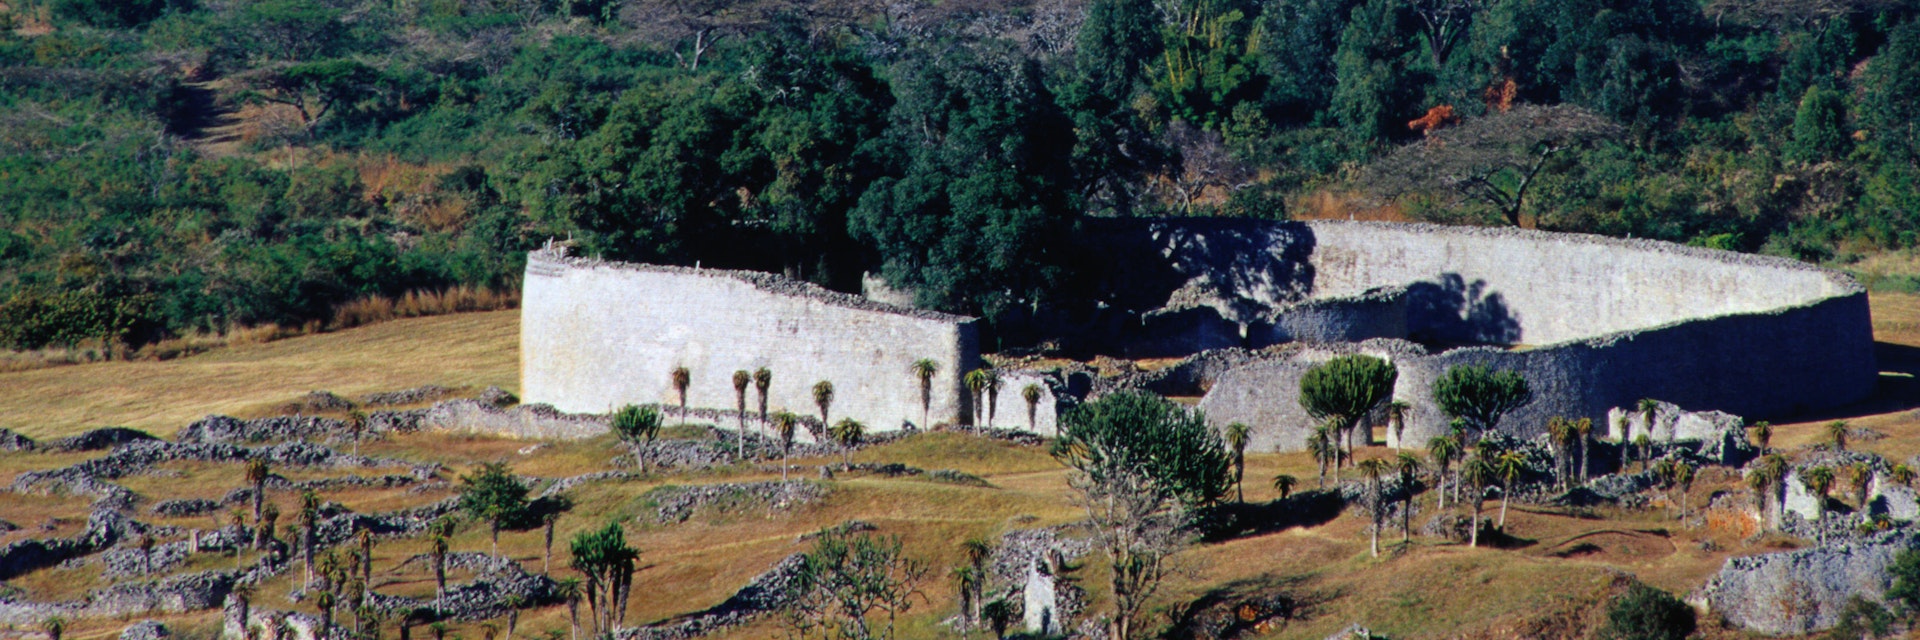 The Great Enclosure at the Great Zimbabwe National Monument, nearly 100 metres across and 255 metres in circumference, it's the largest ancient structure in Sub-Saharan Africa